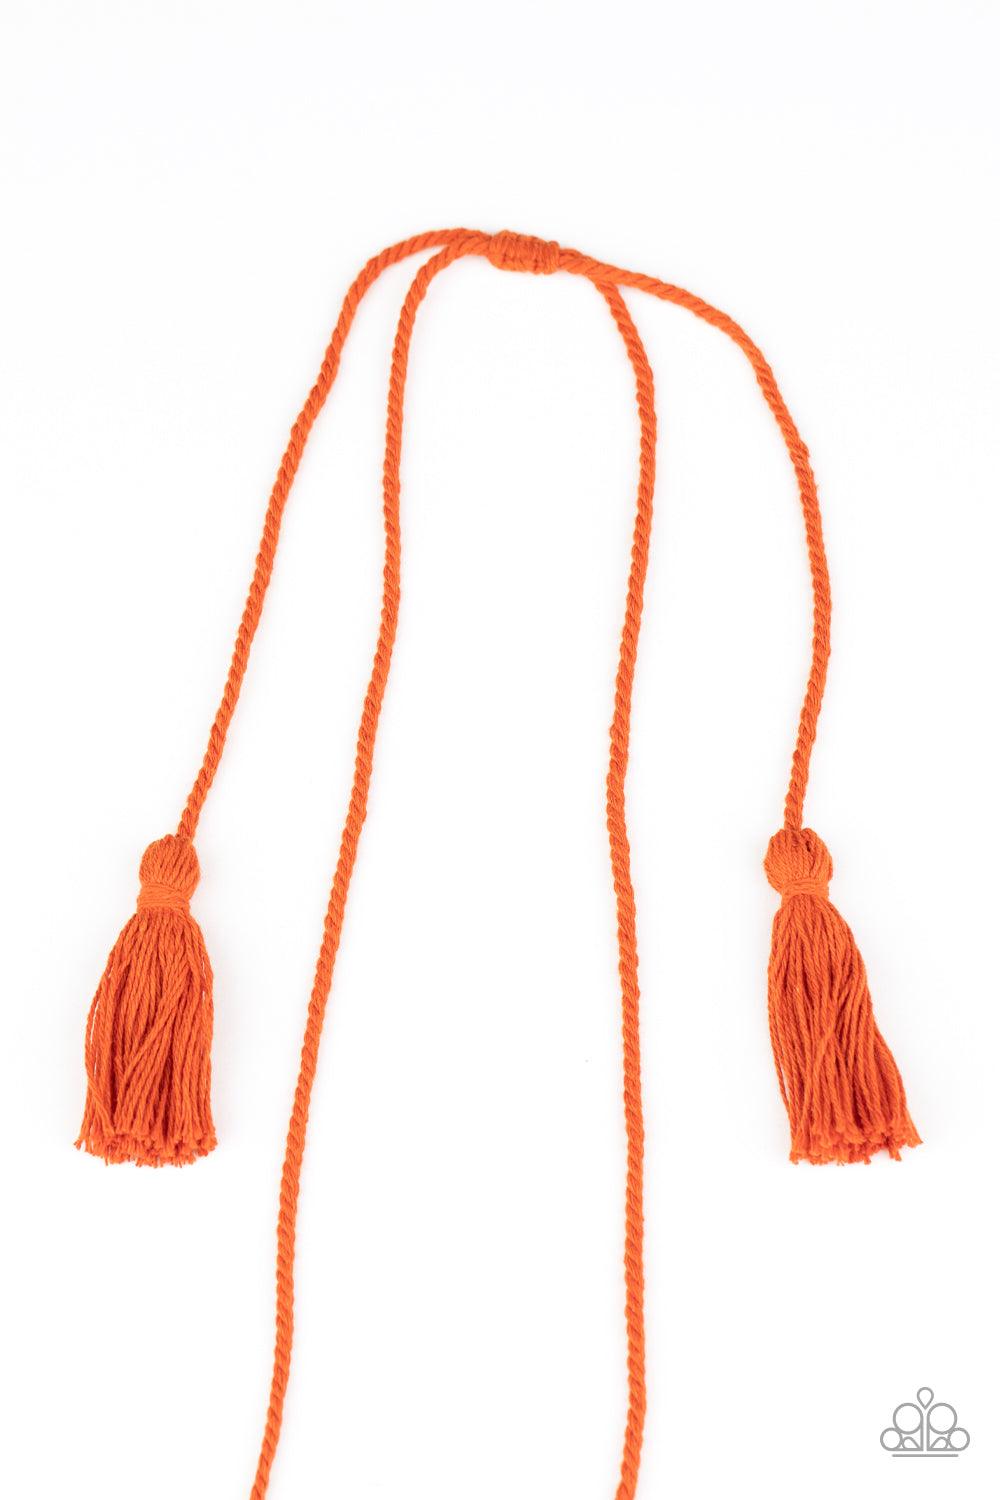 Paparazzi Accessories Between You and MACRAME - Orange Orange cording delicately wraps around a dainty wooden dowel, knotting into a tasseled macrame centerpiece at the bottom of a dramatically lengthened display. Features an adjustable sliding knot closu